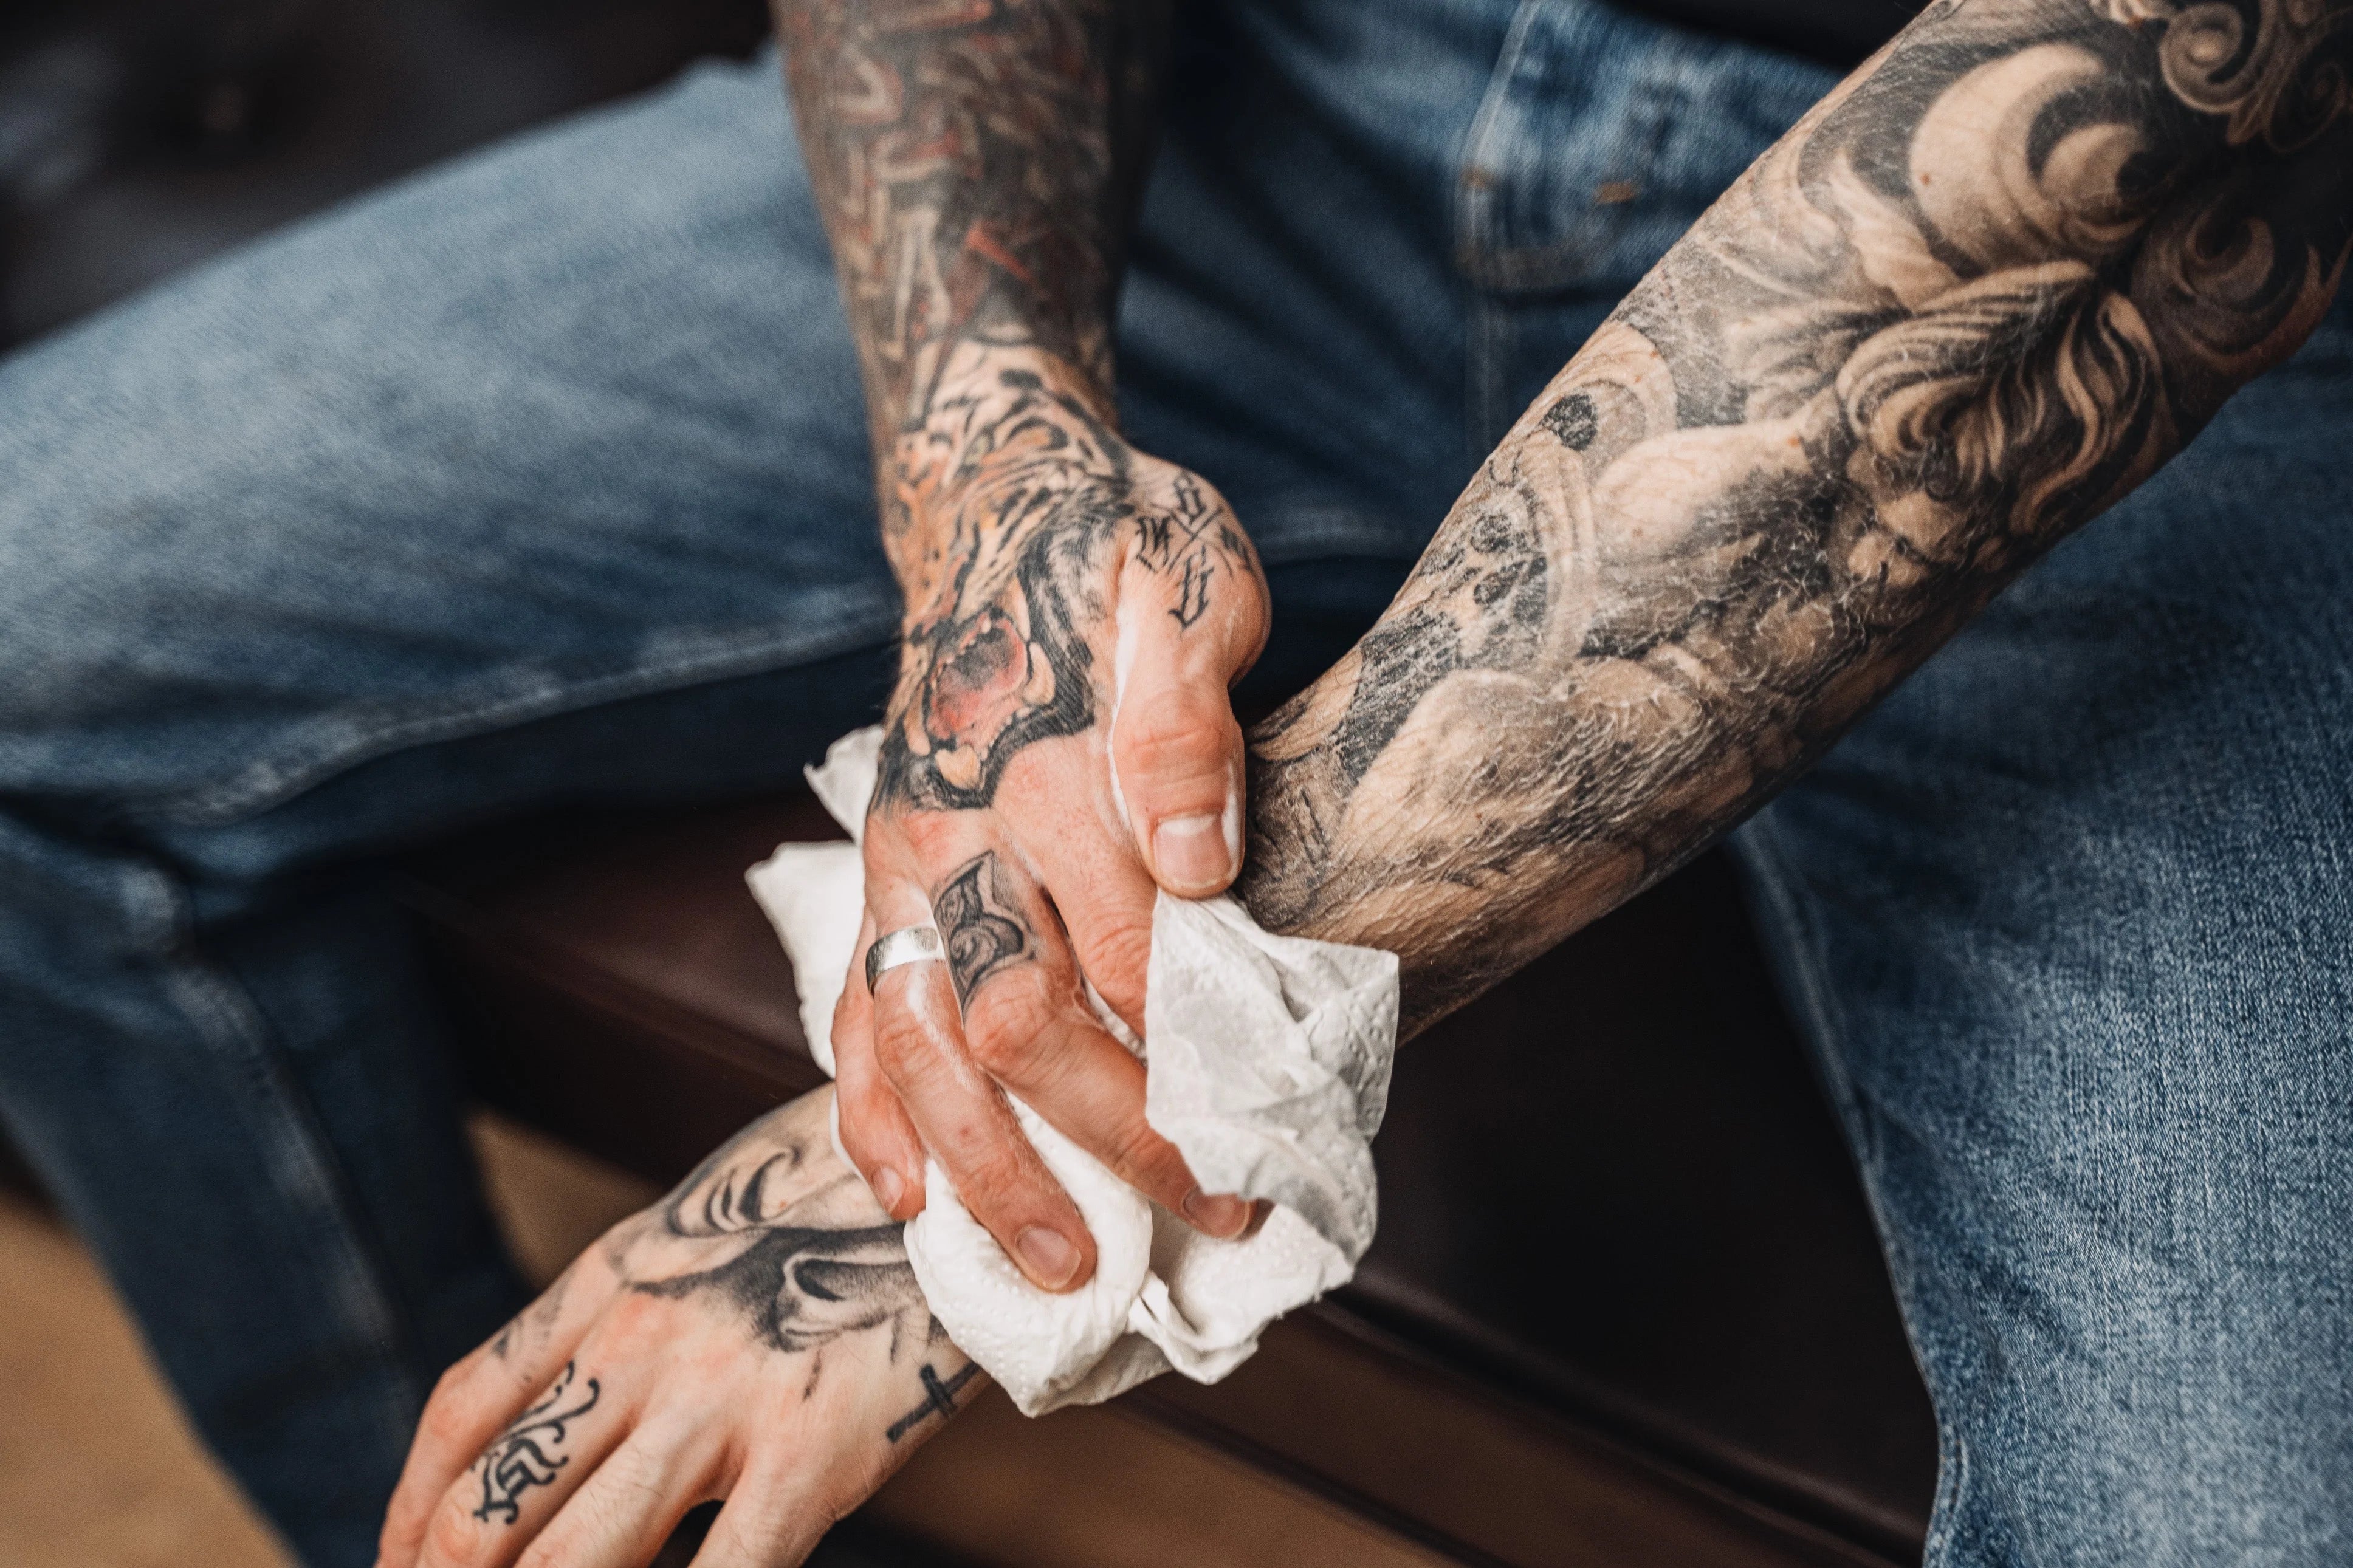 Tattoo Aftercare  Tattoo aftercare tips Tattoo aftercare Learn to tattoo